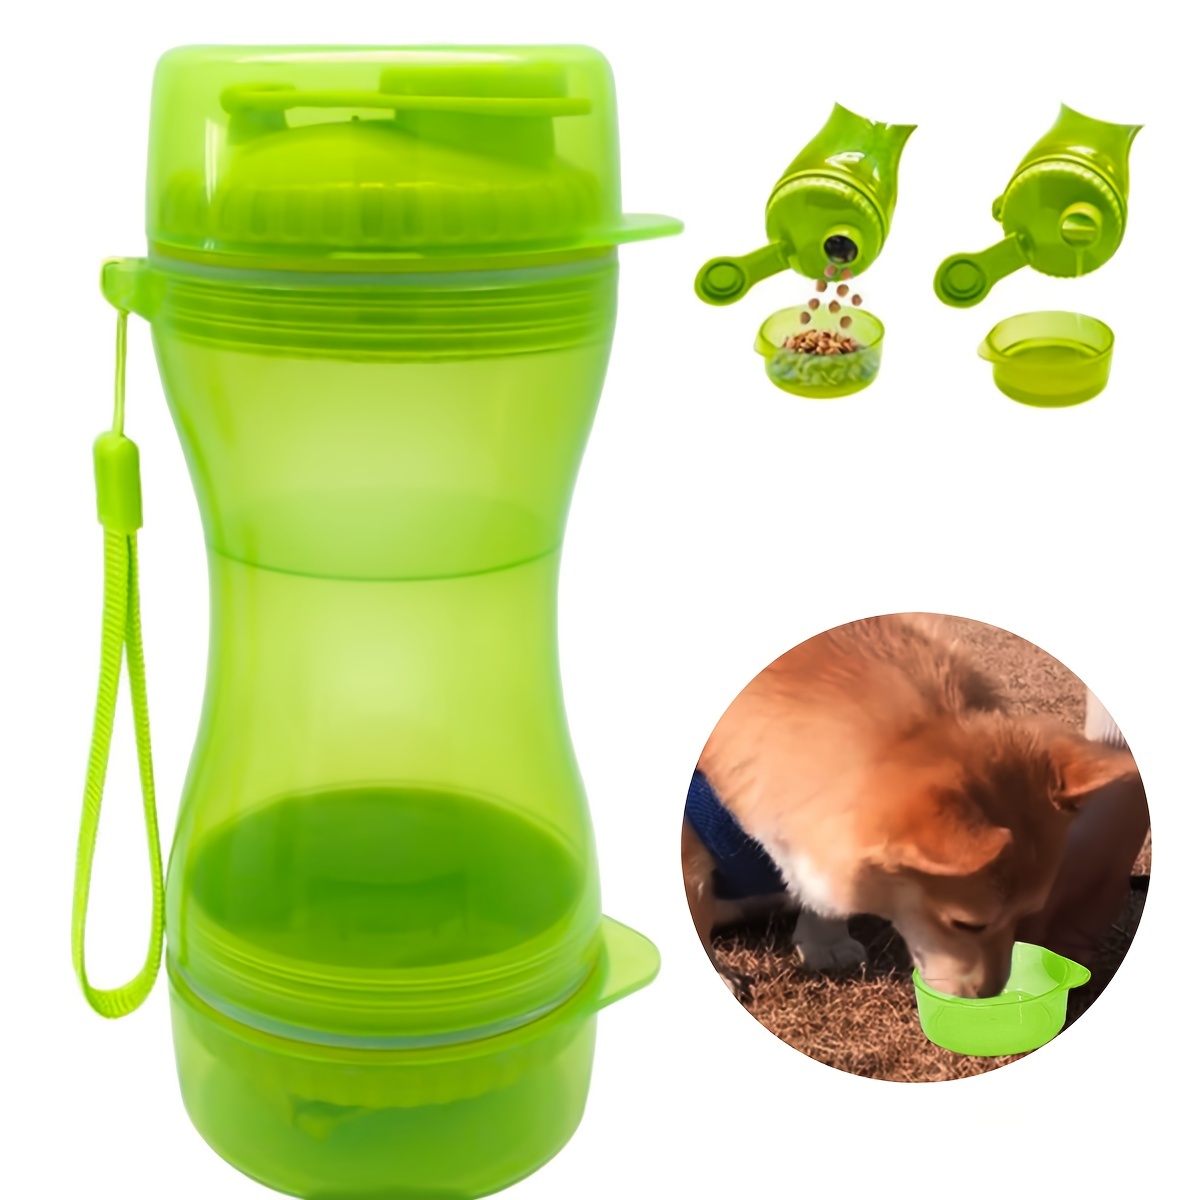 

Dog Water Bottle, Two-in-one Water Cup Dry And Wet Separation Dog Travel Drinking Feeder Bowl For Small Medium Dogs